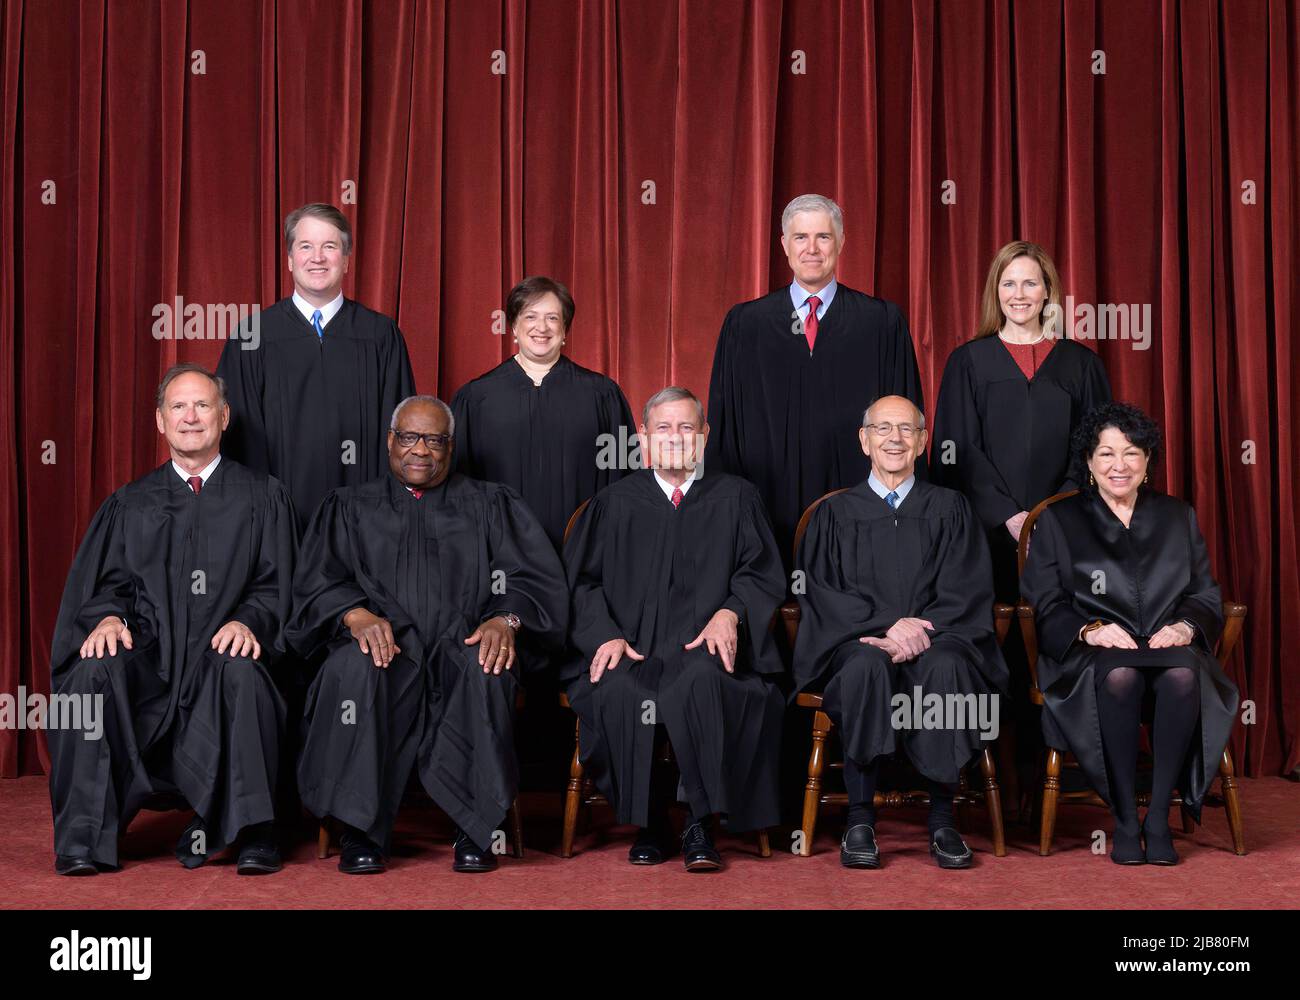 Official group portrait of all U.S. Supreme Court Justices on April 23, 2021.  Front row, left to right — Associate Justice Samuel A. Alito, Associate Justice Clarence Thomas, Chief Justice John G. Roberts, Jr., Associate Justice Stephen G. Breyer, Associate Justice Sonia Sotomayor.  Back row — Associate Justice Brett M. Kavanaugh, Associate Justice Elena Kagan, Associate Justice Neil M. Gorsuch, Associate Justice Amy Coney Barrett.  (Photo by Fred Schilling / Collection of the Supreme Court of the United States) Stock Photo